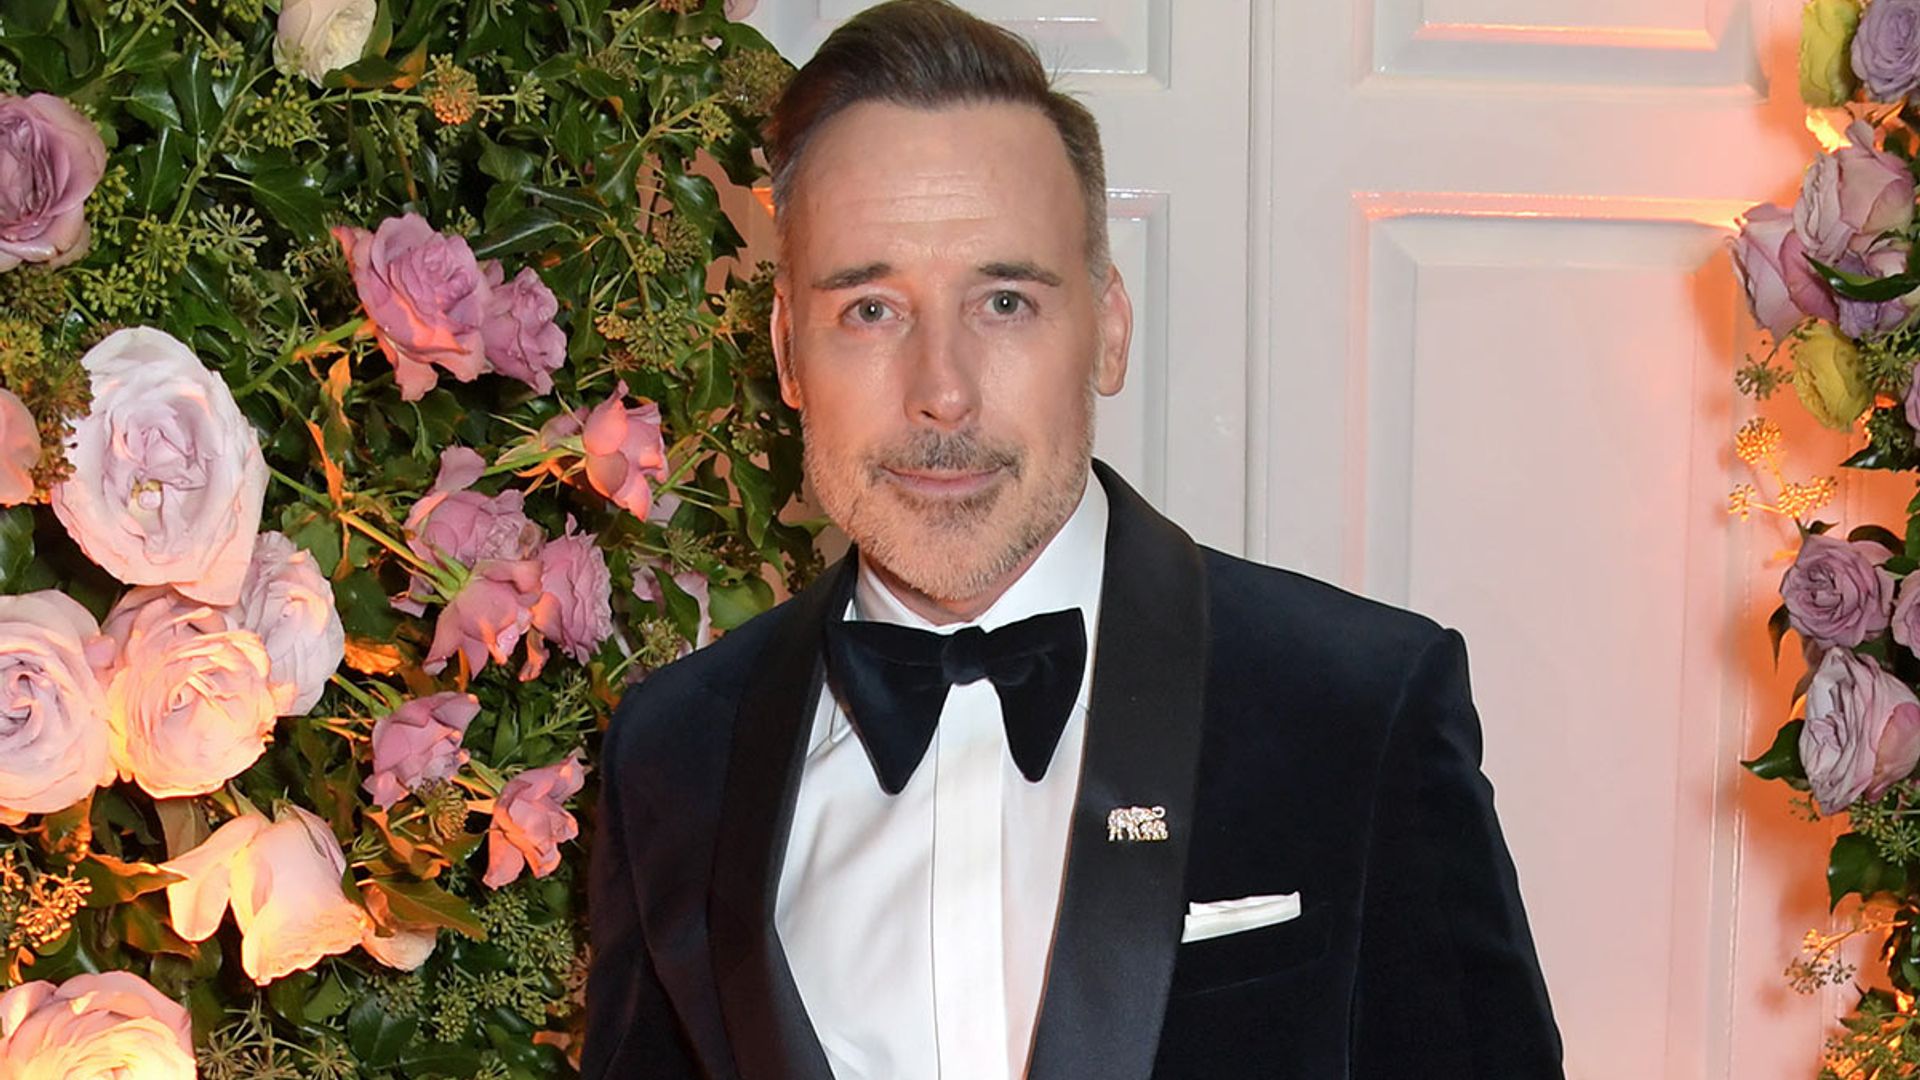 David Furnish poses with sons Elijah and Zachary in epic Halloween costumes